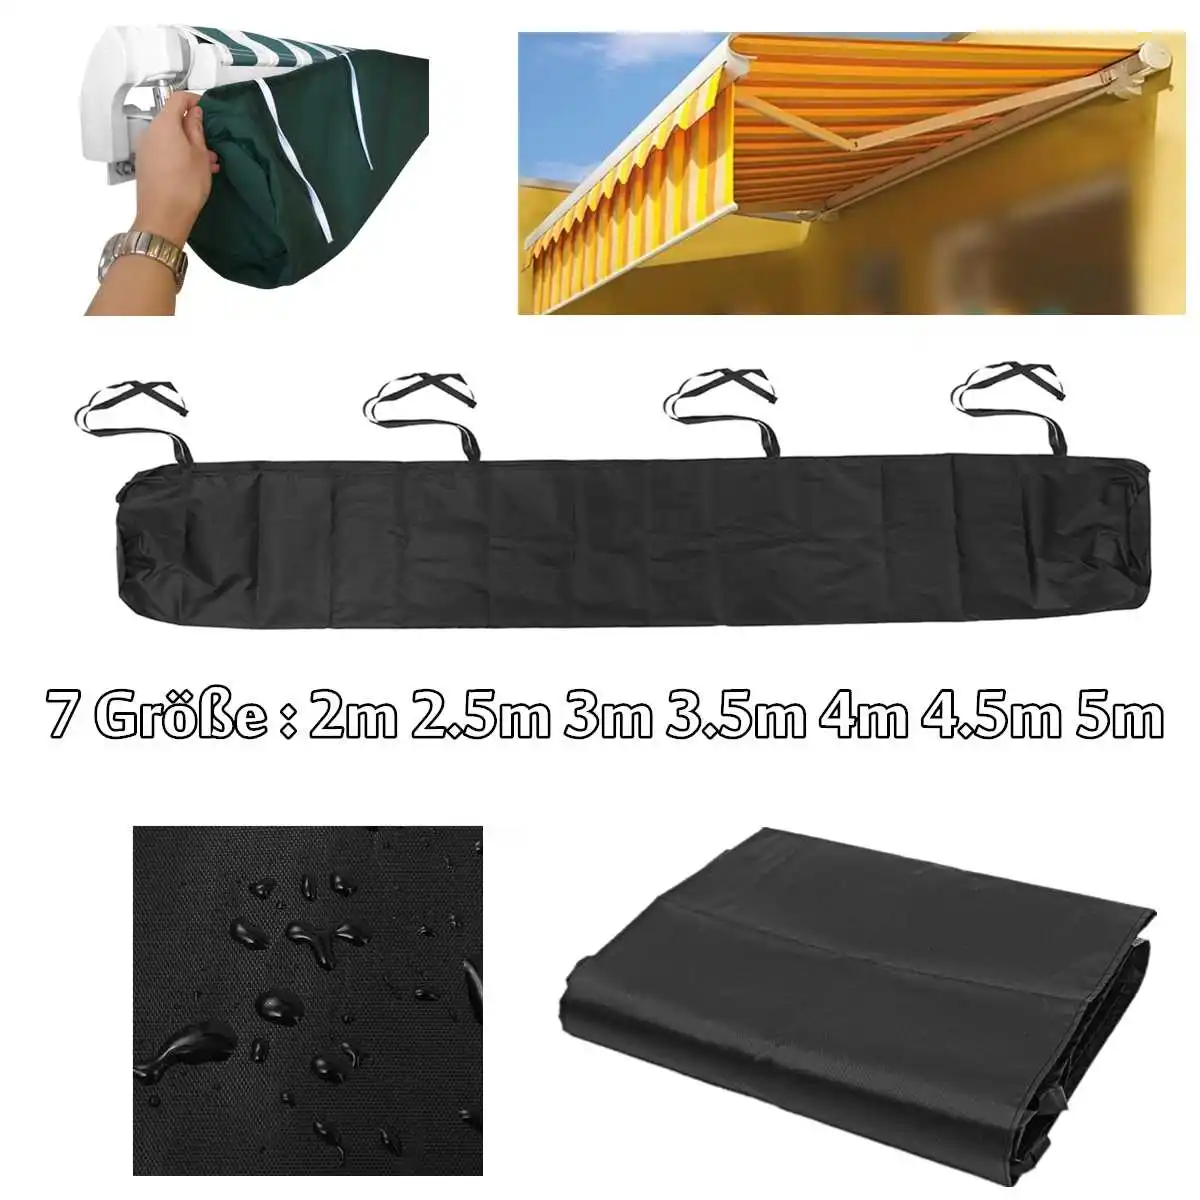 Patio Awning Weather Rain Cover Awning Sun Canopy Storage Bag Protector New 